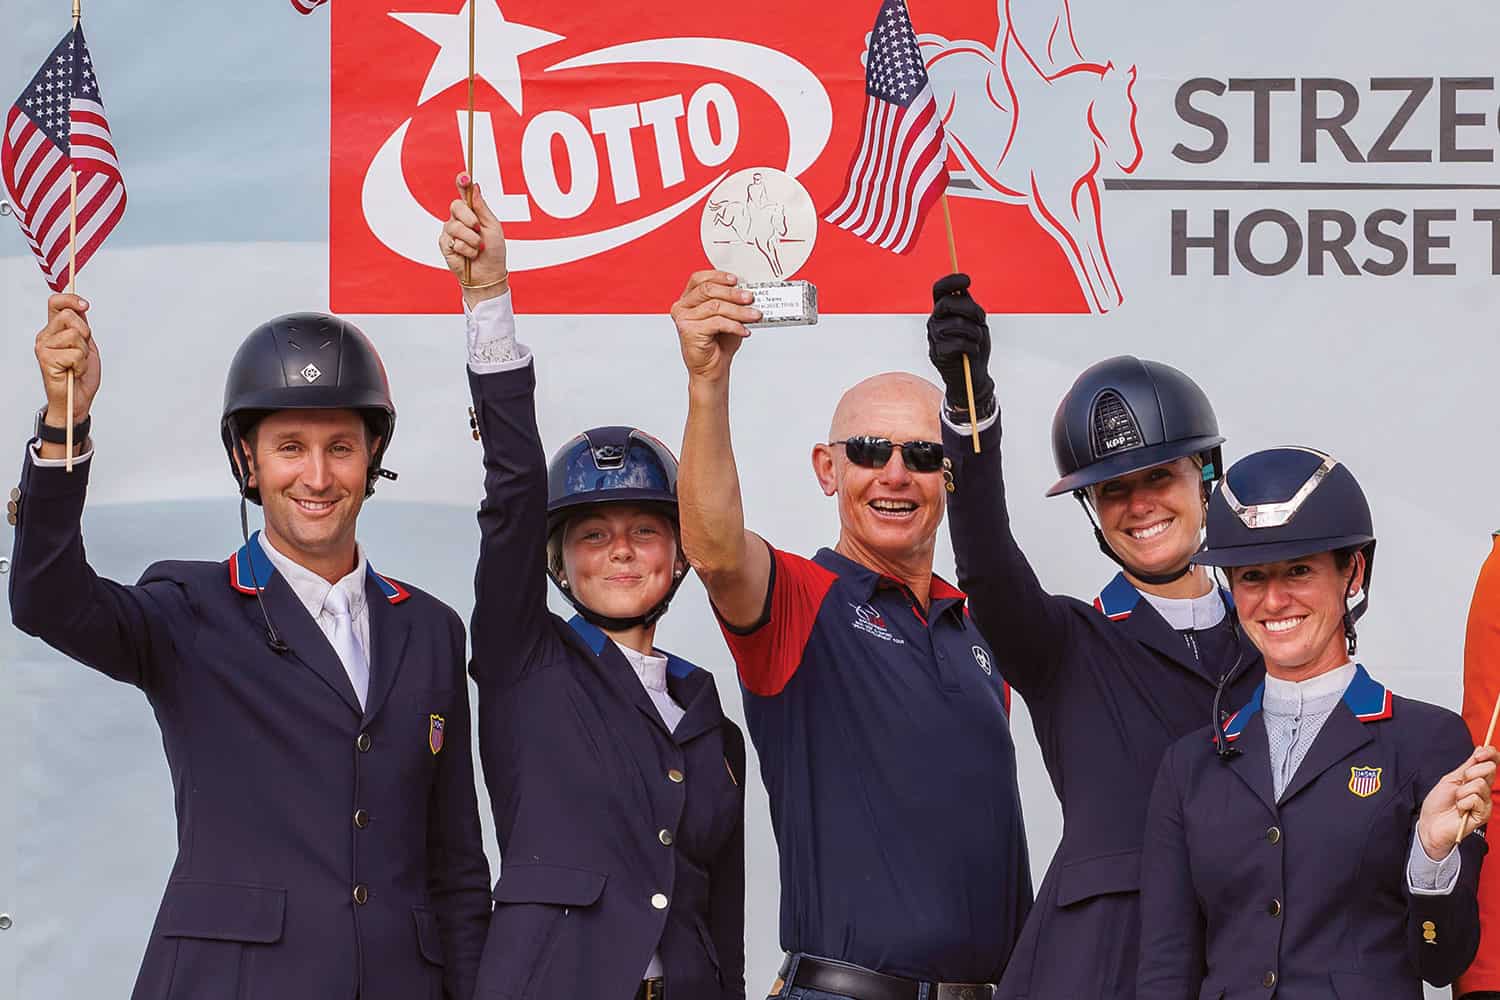 Four Karen E. Stives Endowment Fund Grant Recipients Take Silver in the 2023 FEI Eventing Nations Cup™ Poland CCIO4*-NC-S. (L-R) Andrew McConnon, Cassie Sanger, Chef d’Equipe
Coach Leslie Law, Caroline Pamukcu, and Jenny Caras
Photo by Libby Law